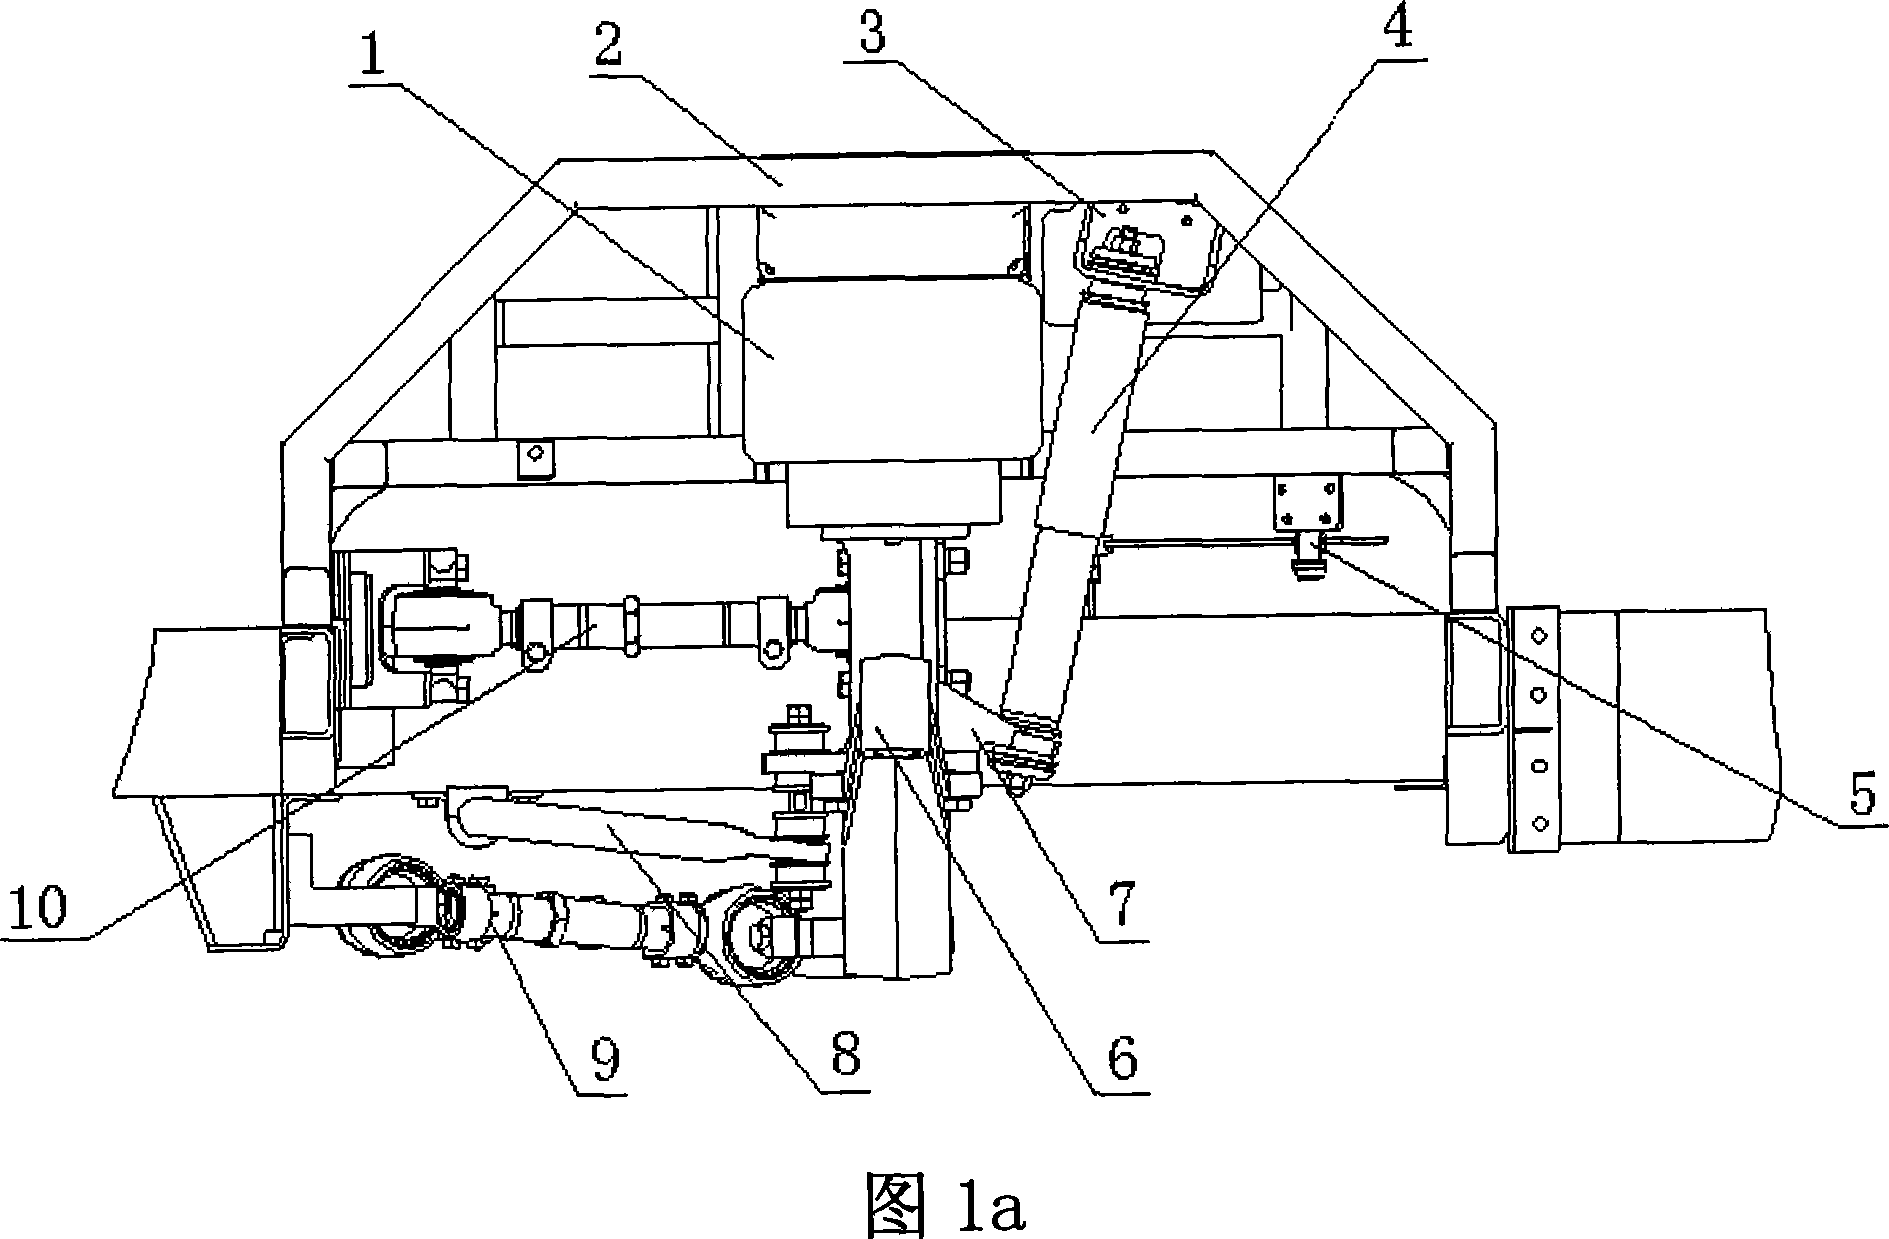 Mounting method for air spring vehicle chasis and its supporting rod